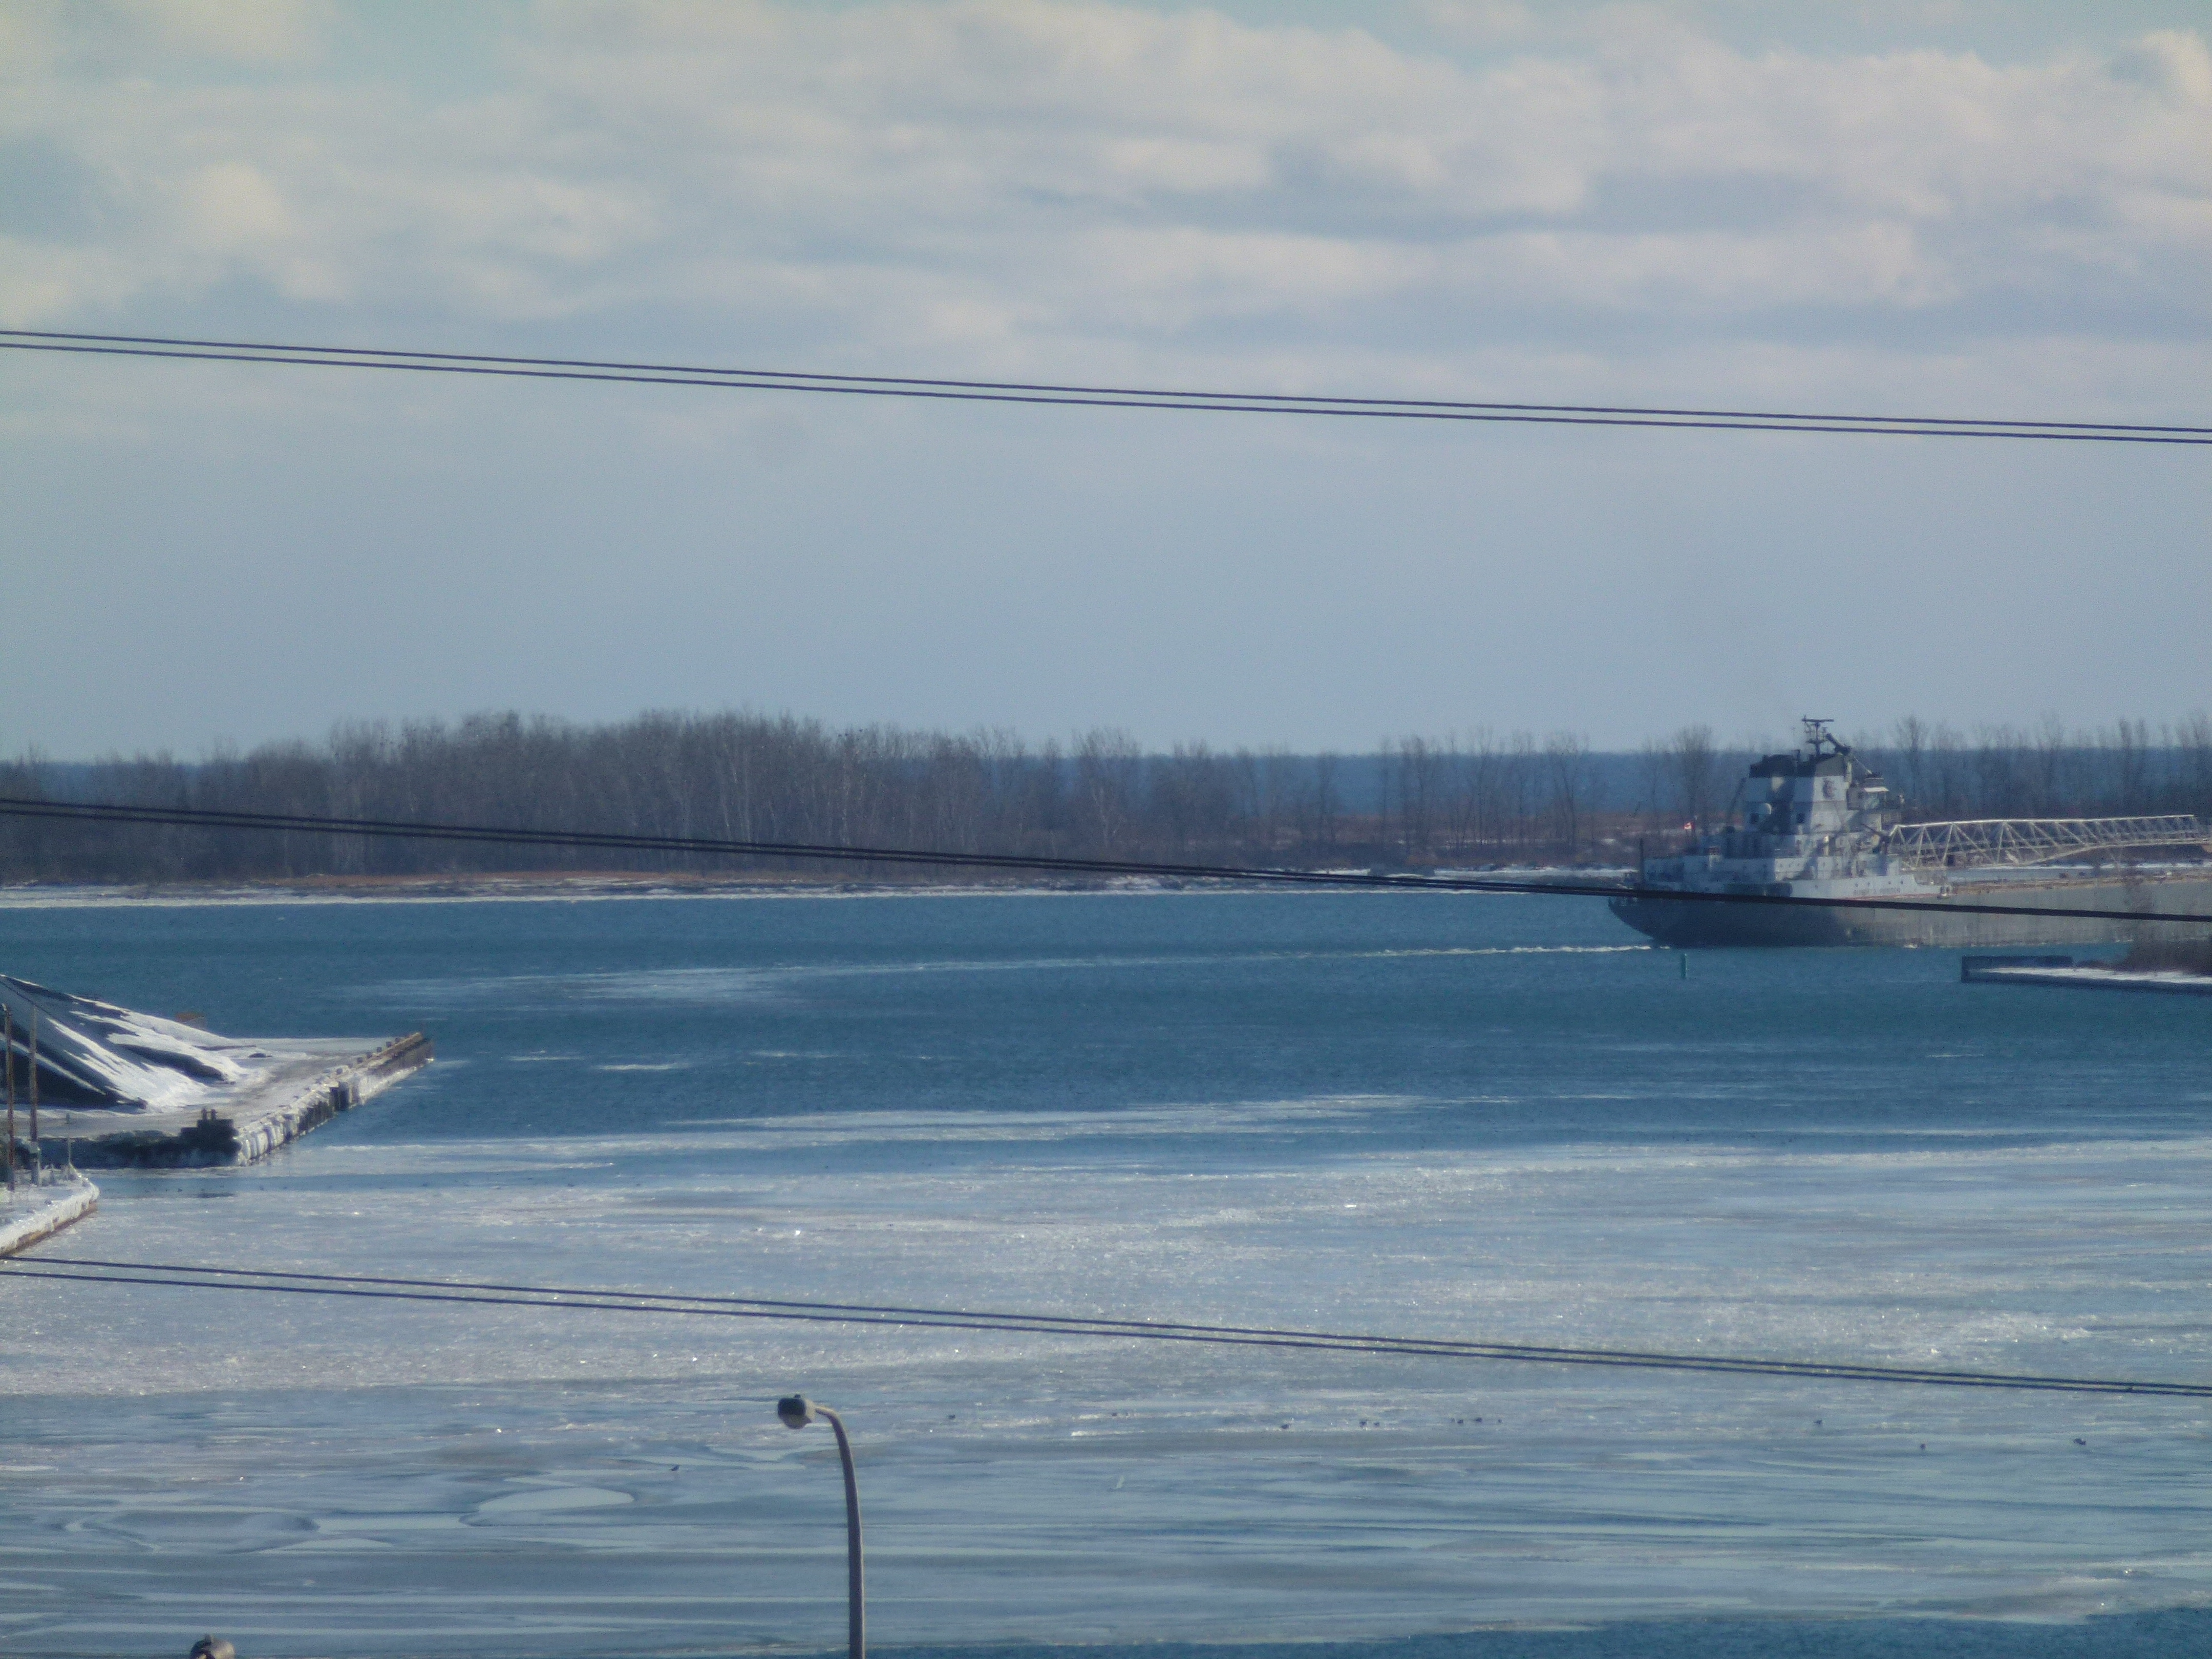 Unknown lake freighter departs Toronto through the Eastern Gap, 2013 12 30 (28), Landscape, Ocean, Outdoor, Sea, HQ Photo